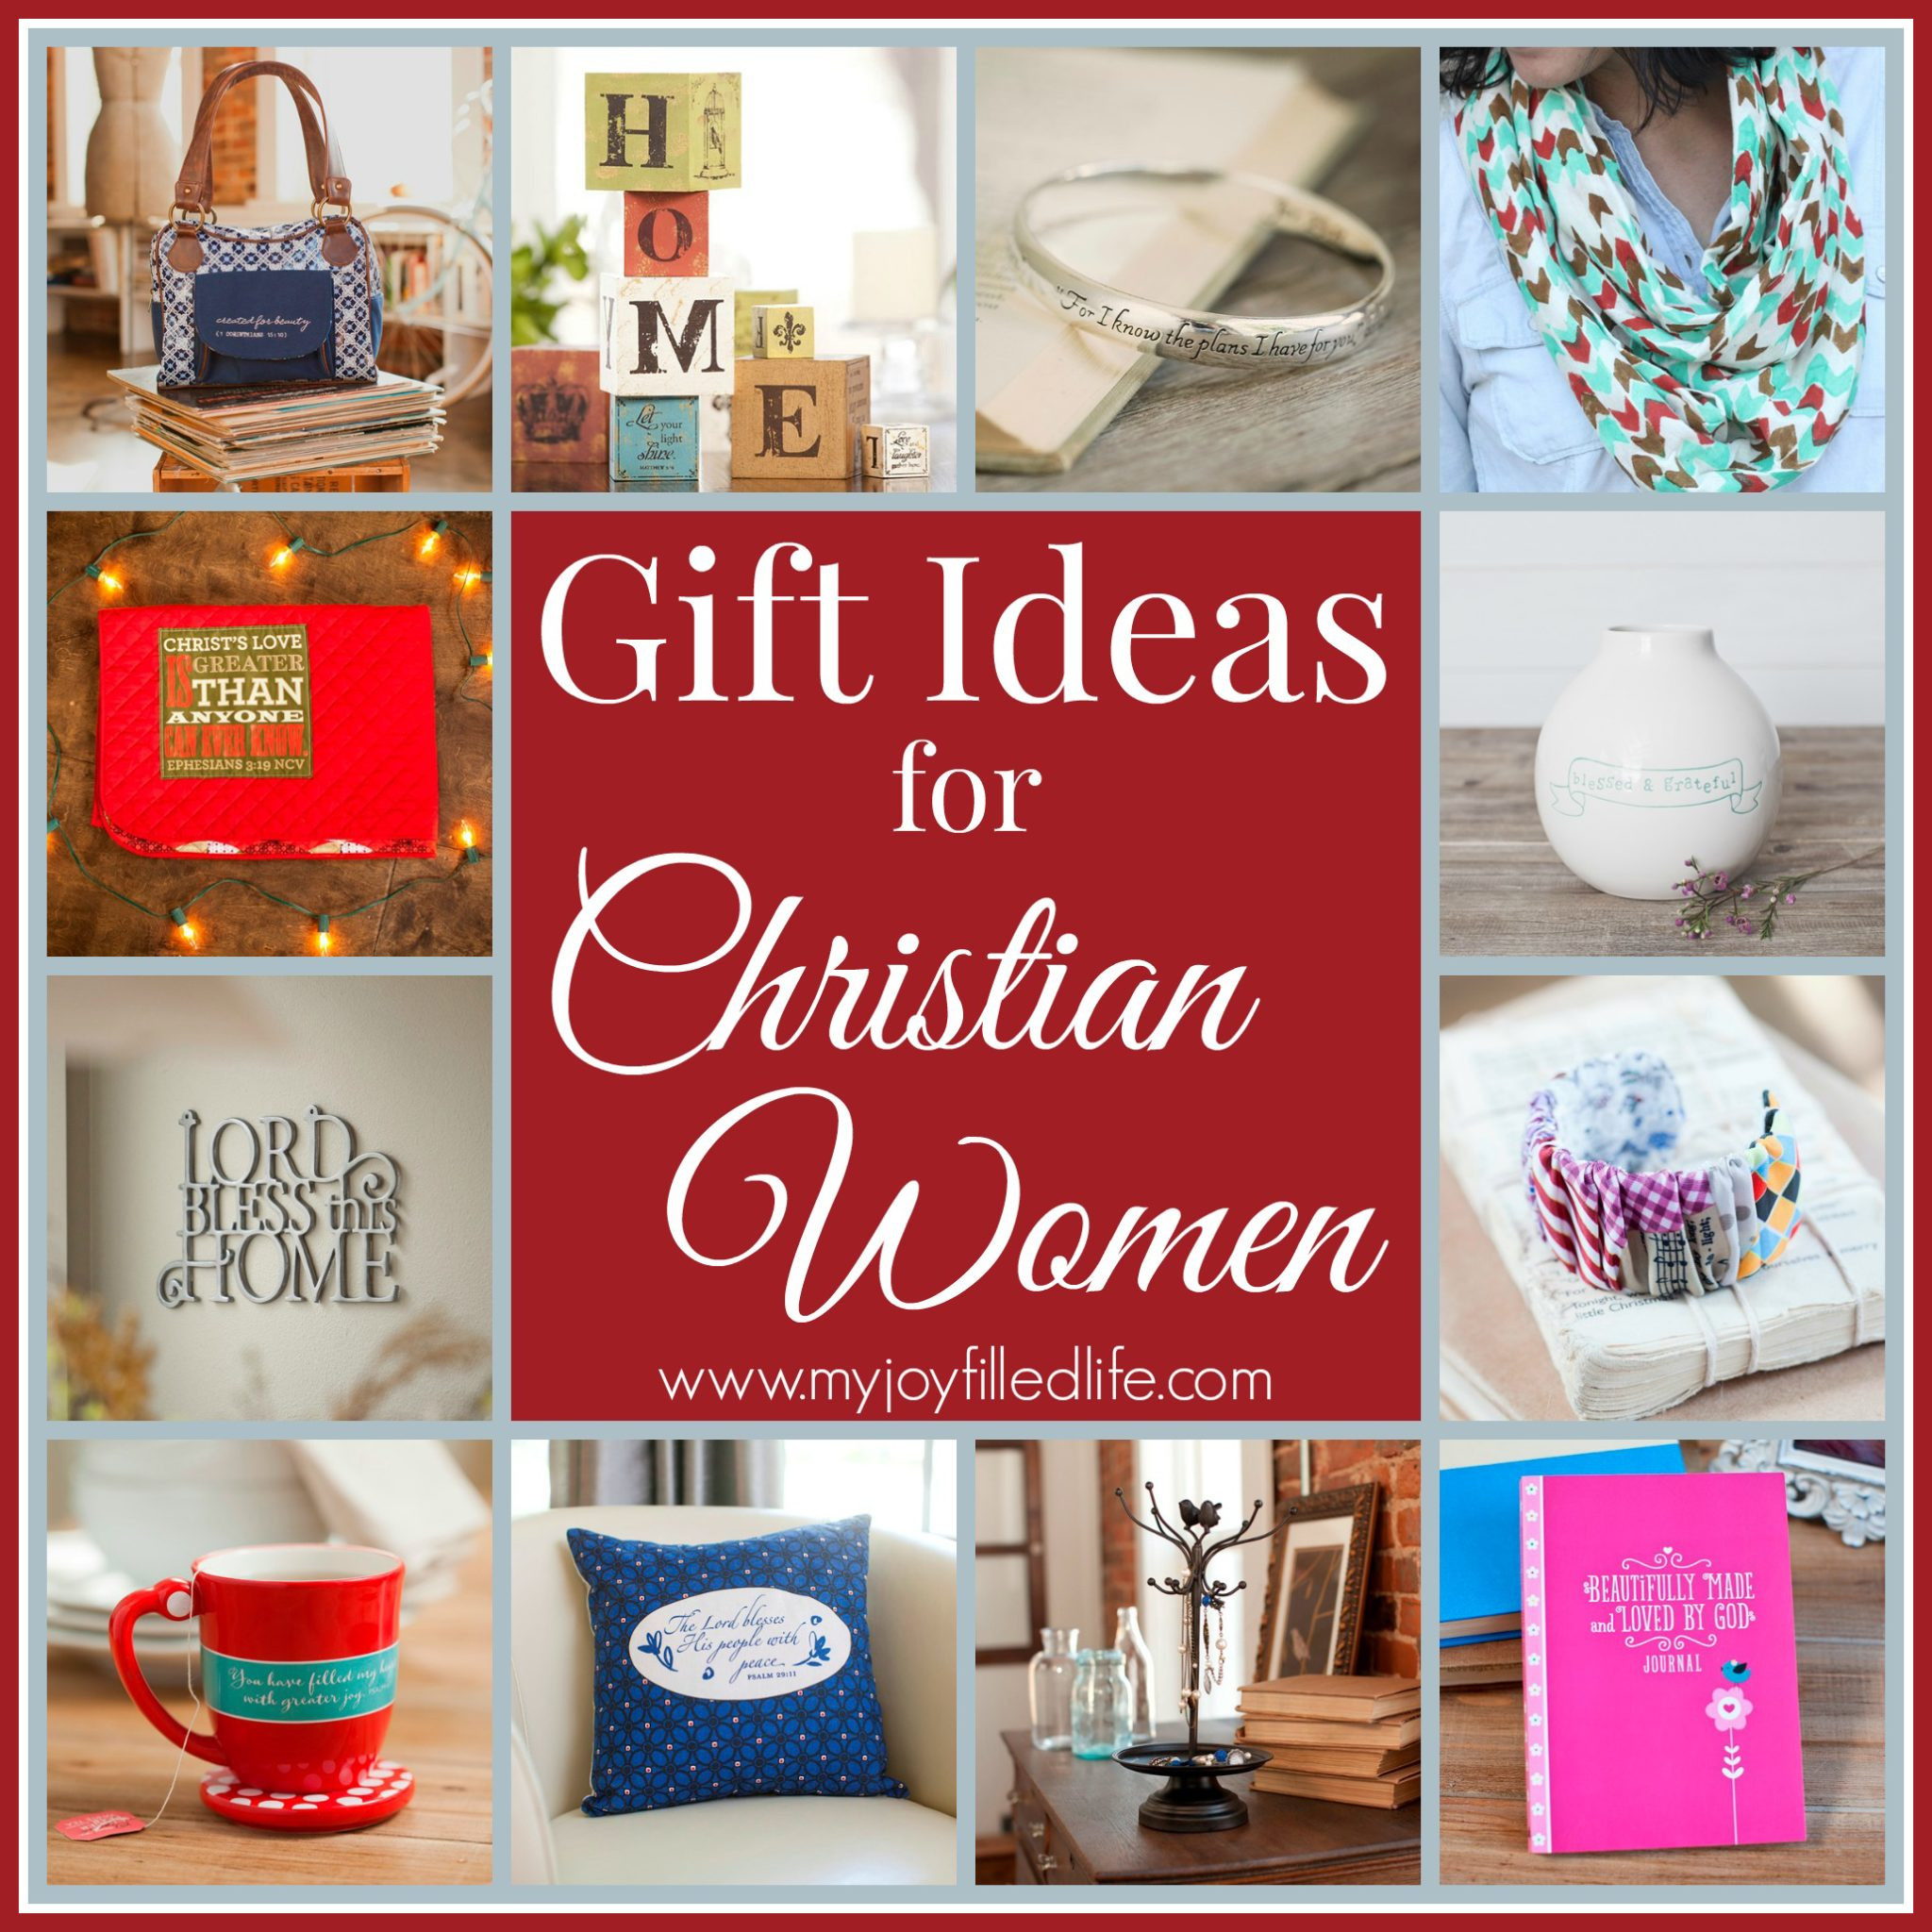 Mother'S Day Gift Ideas For Church Ladies
 Gift Ideas for Christian Women My Joy Filled Life